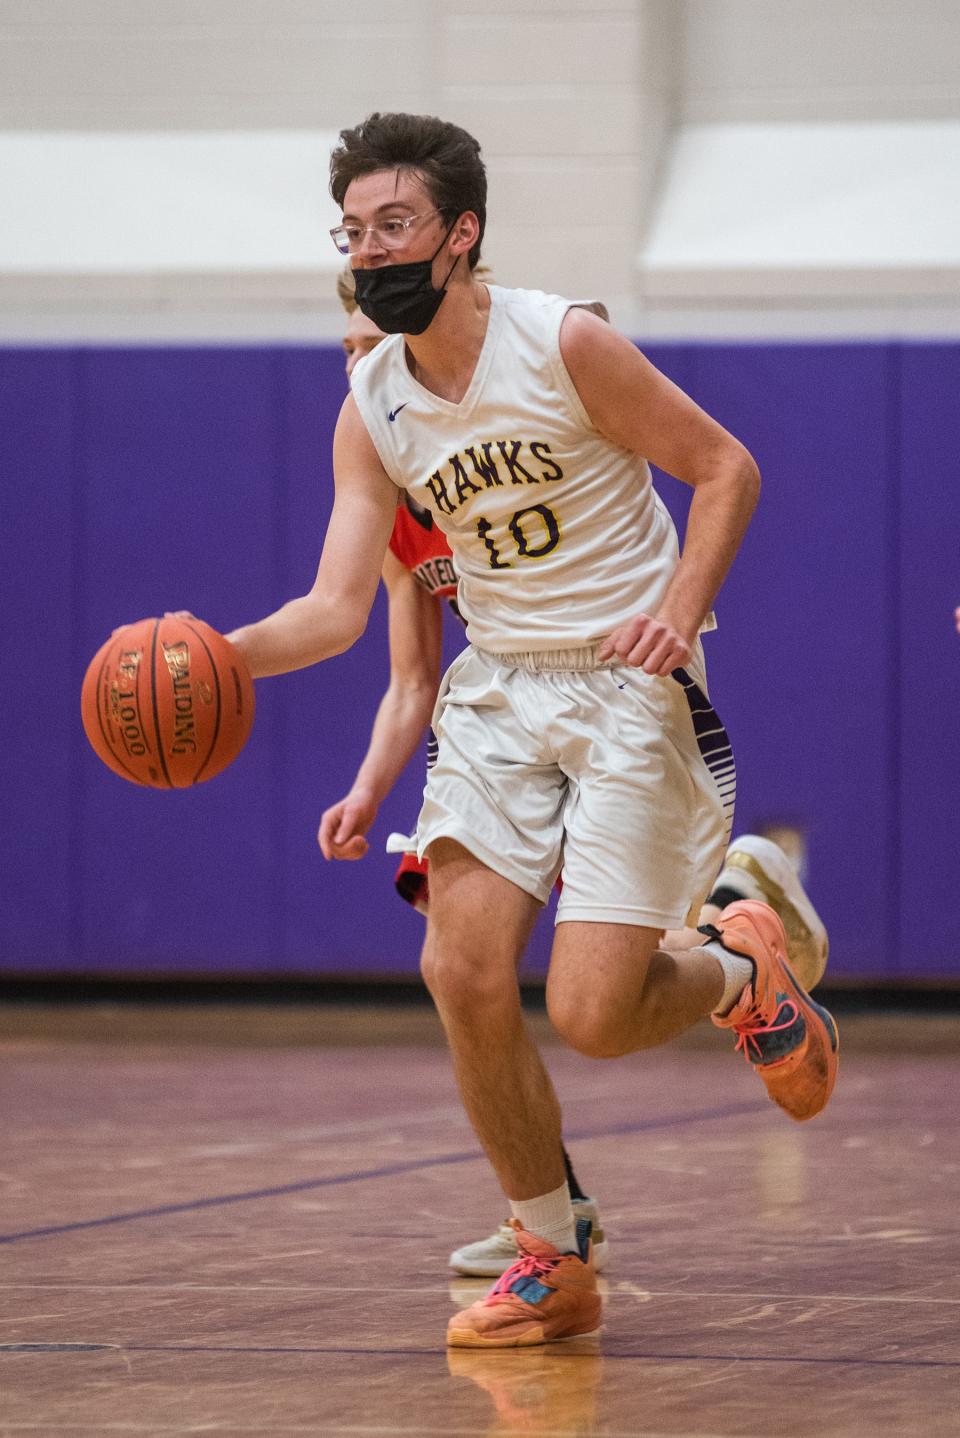 Rhinebeck's Bryce Aierstok drives up court during Friday's game against Onteora.